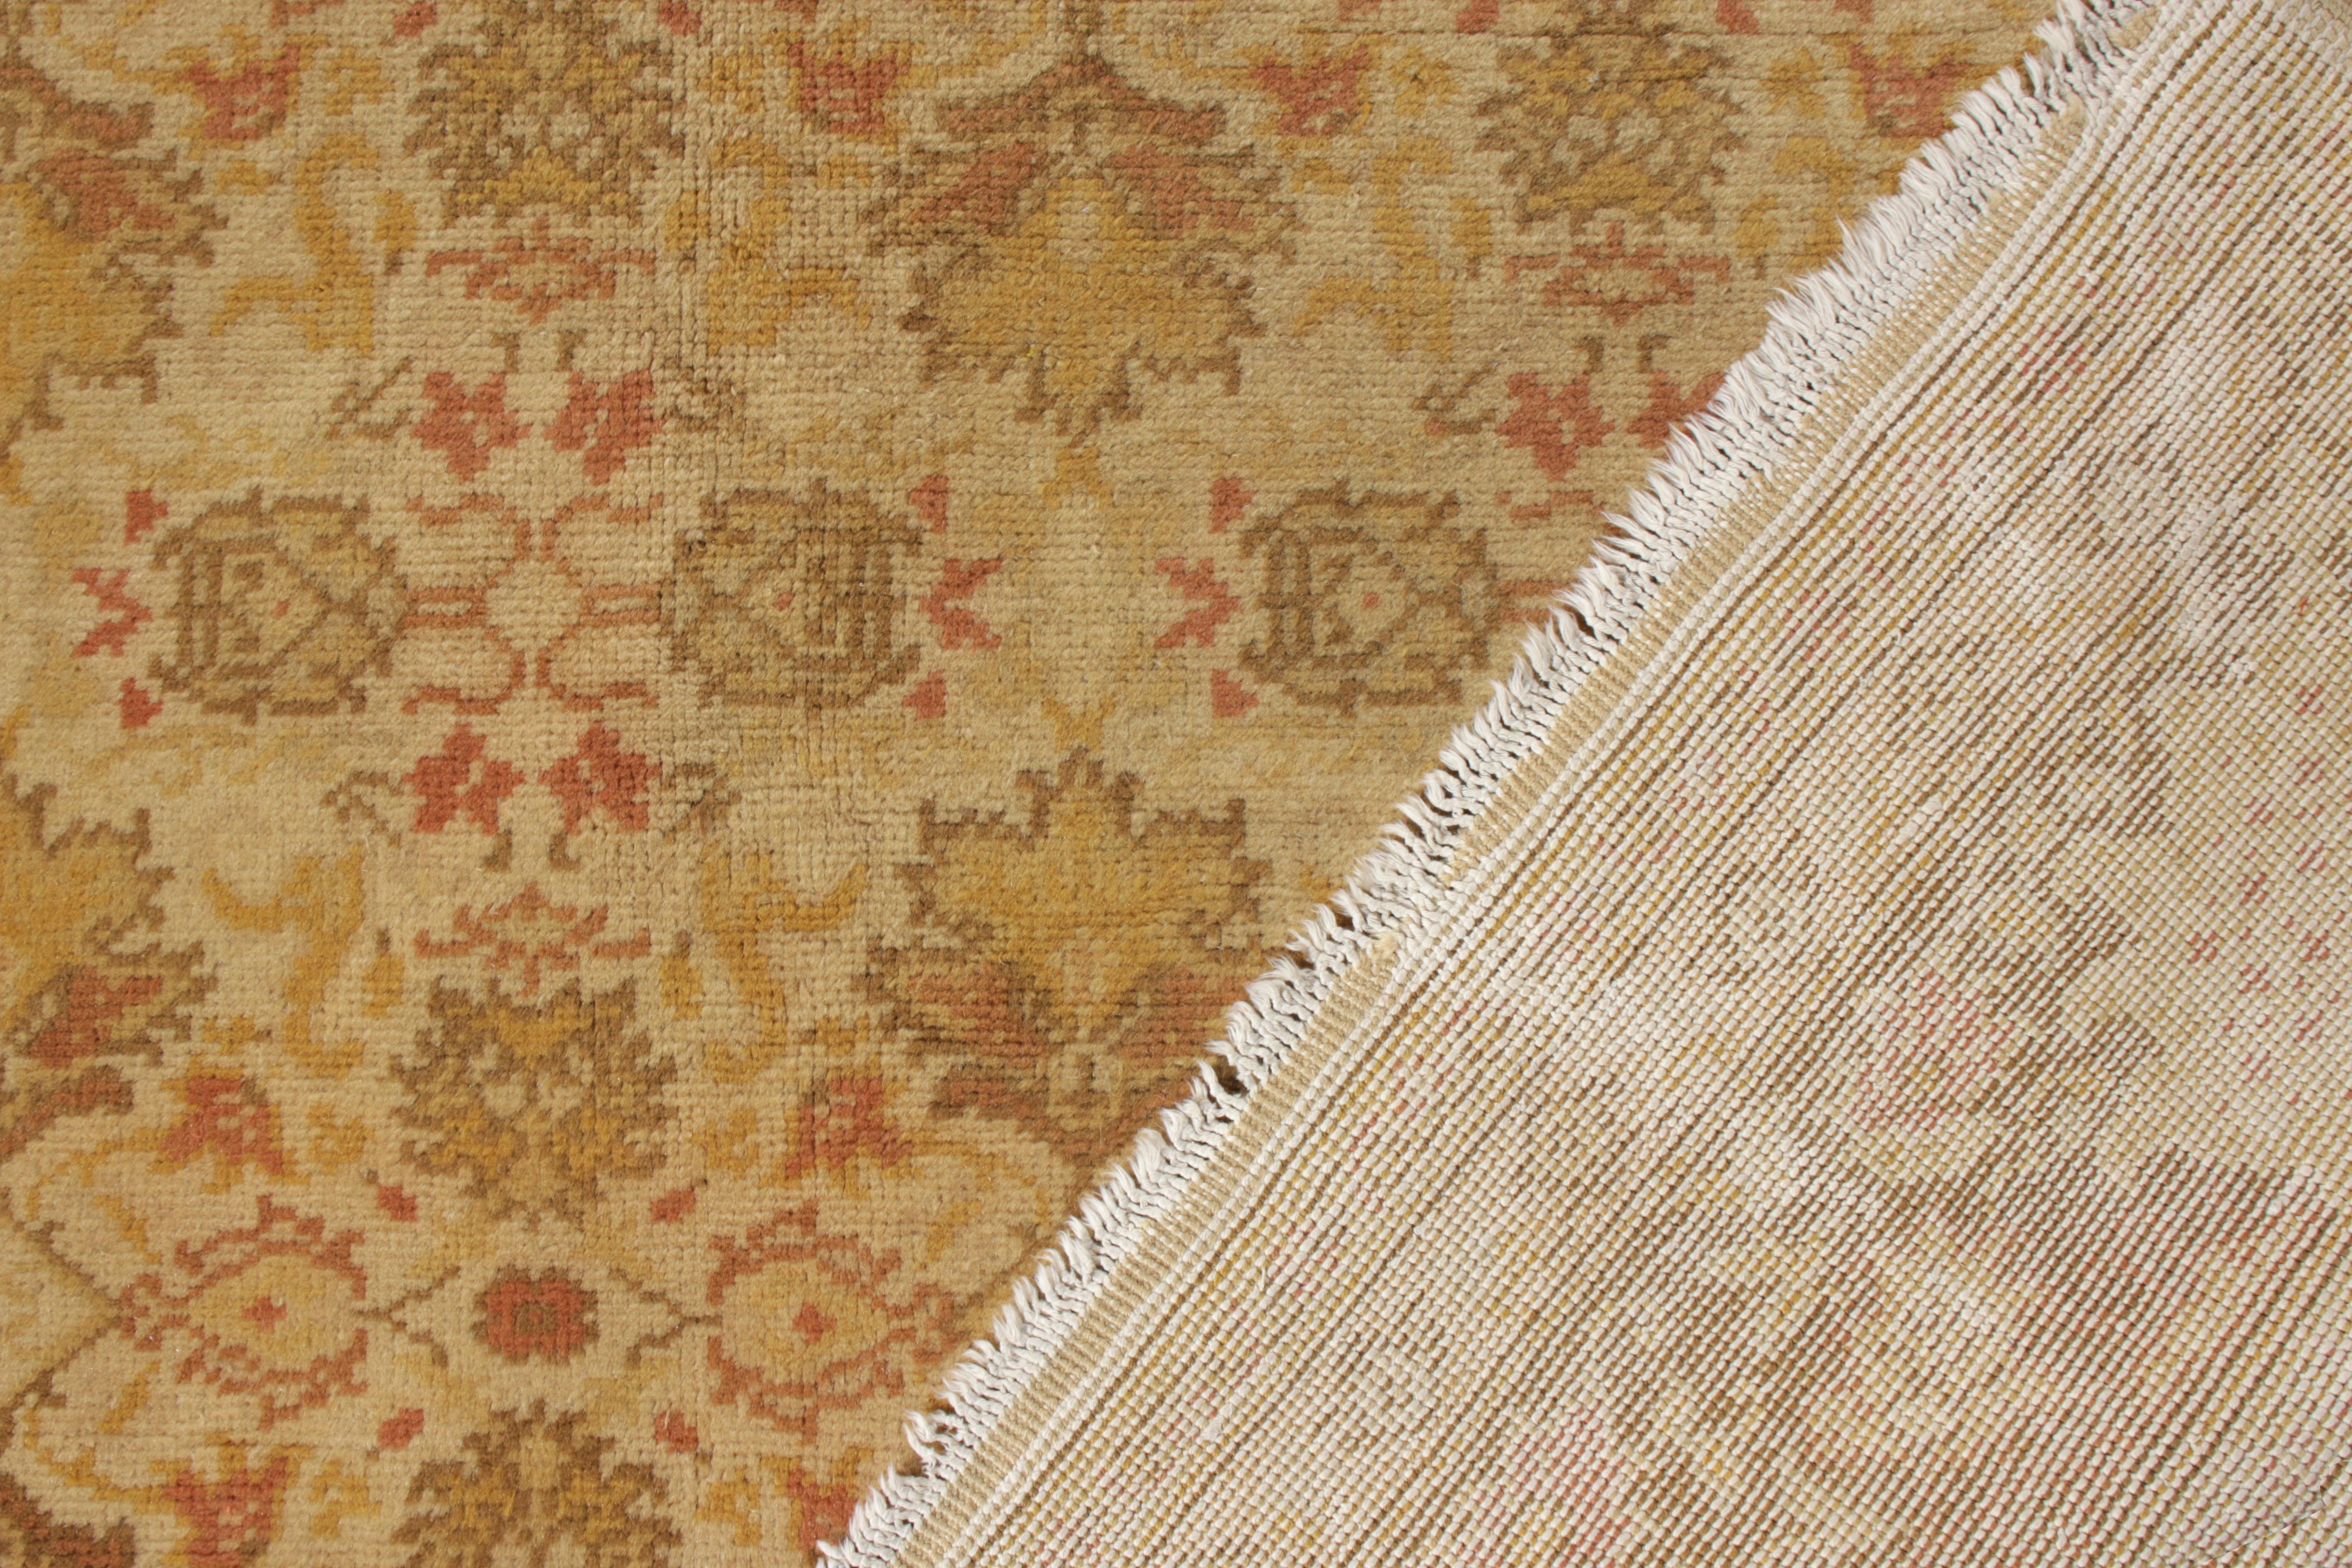 Vintage Oushak-Style European Rug in Gold and Beige-Brown Floral Pattern In Good Condition For Sale In Long Island City, NY